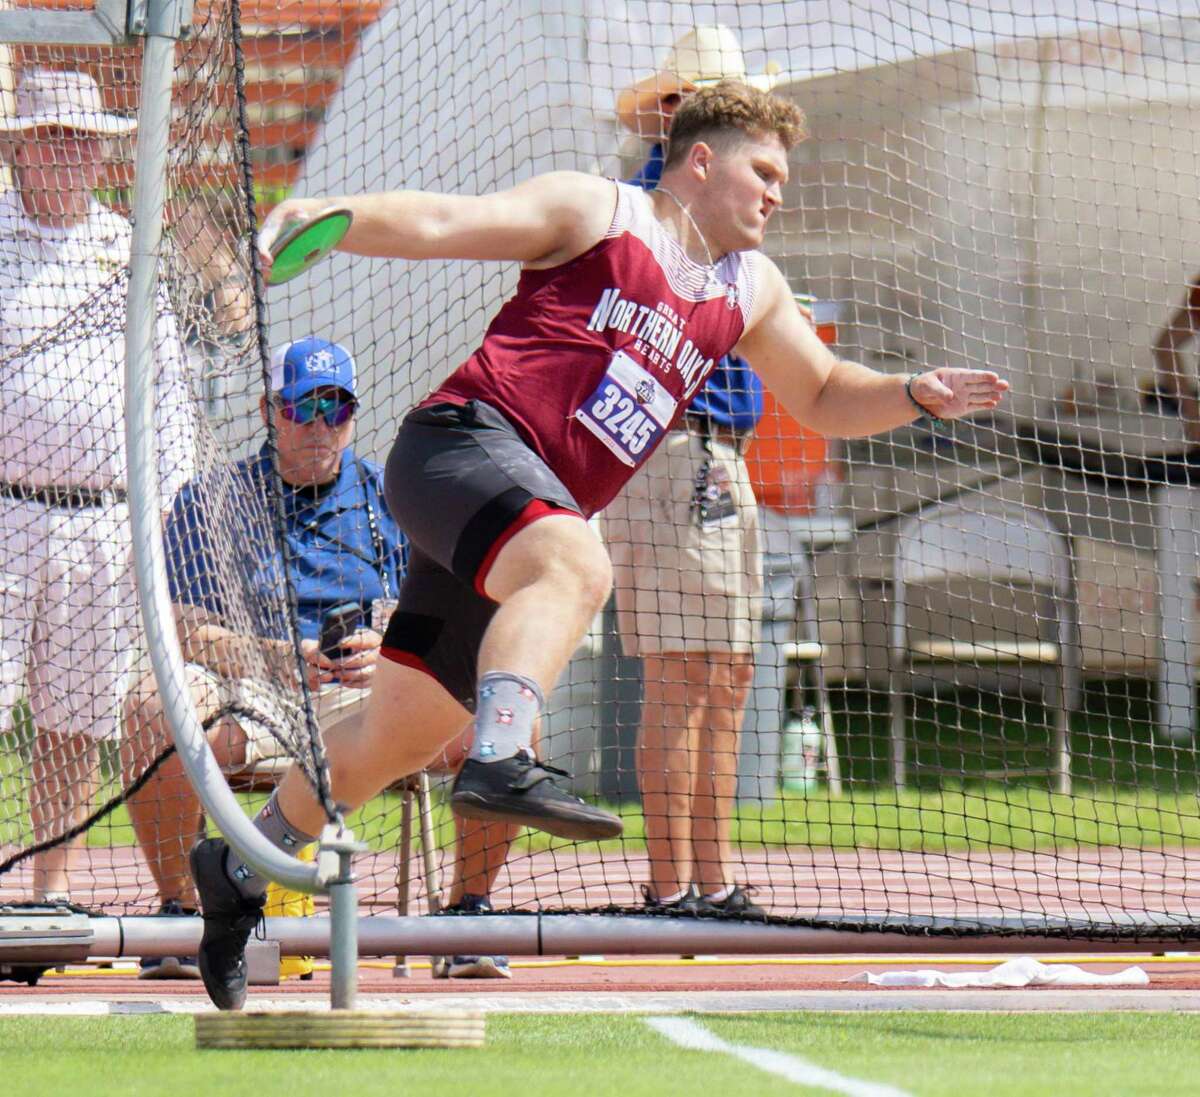 Northern Oaks John Hanson competes in the Class 3A boys discus at the UIL State Track and Field Championship on Thursday, May 12, 2022, at the Mike A. Myers Stadium in Austin, TX. [John Gutierrez / Contributor]